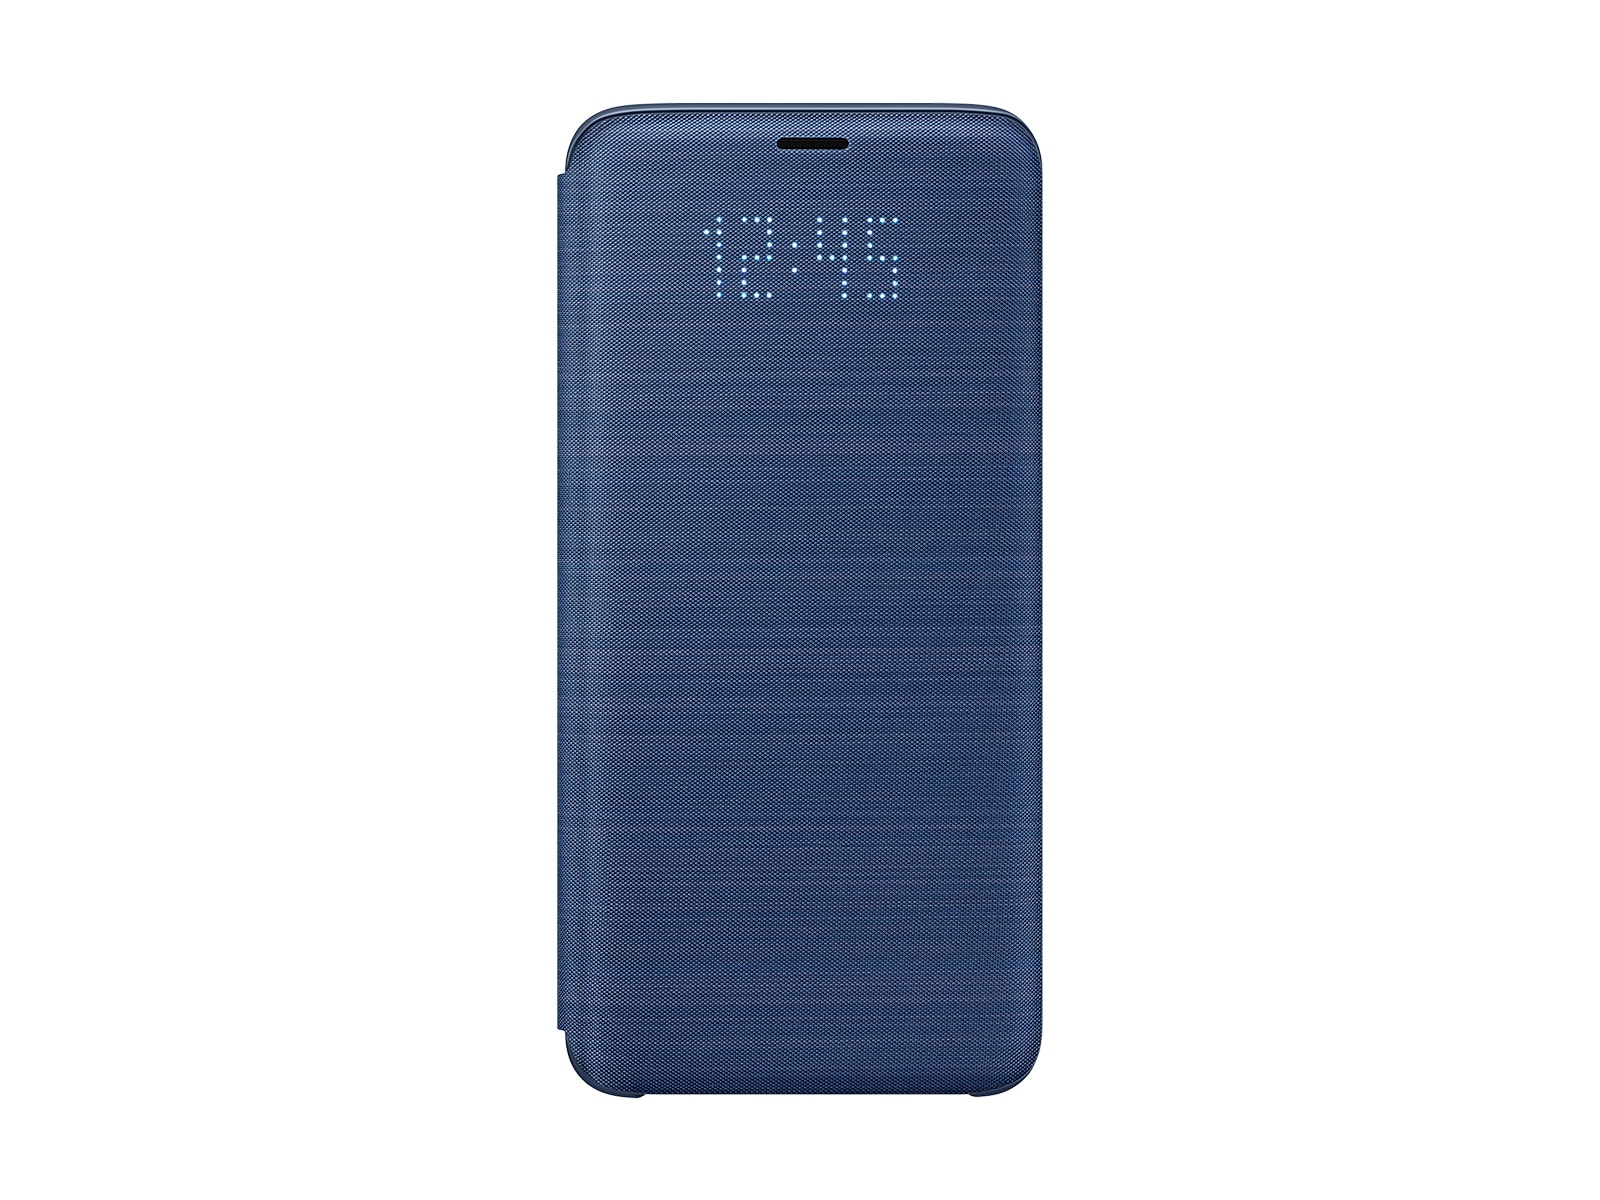 UPC 887276255514 product image for Samsung Galaxy S9+ LED Wallet Cover, Blue | upcitemdb.com